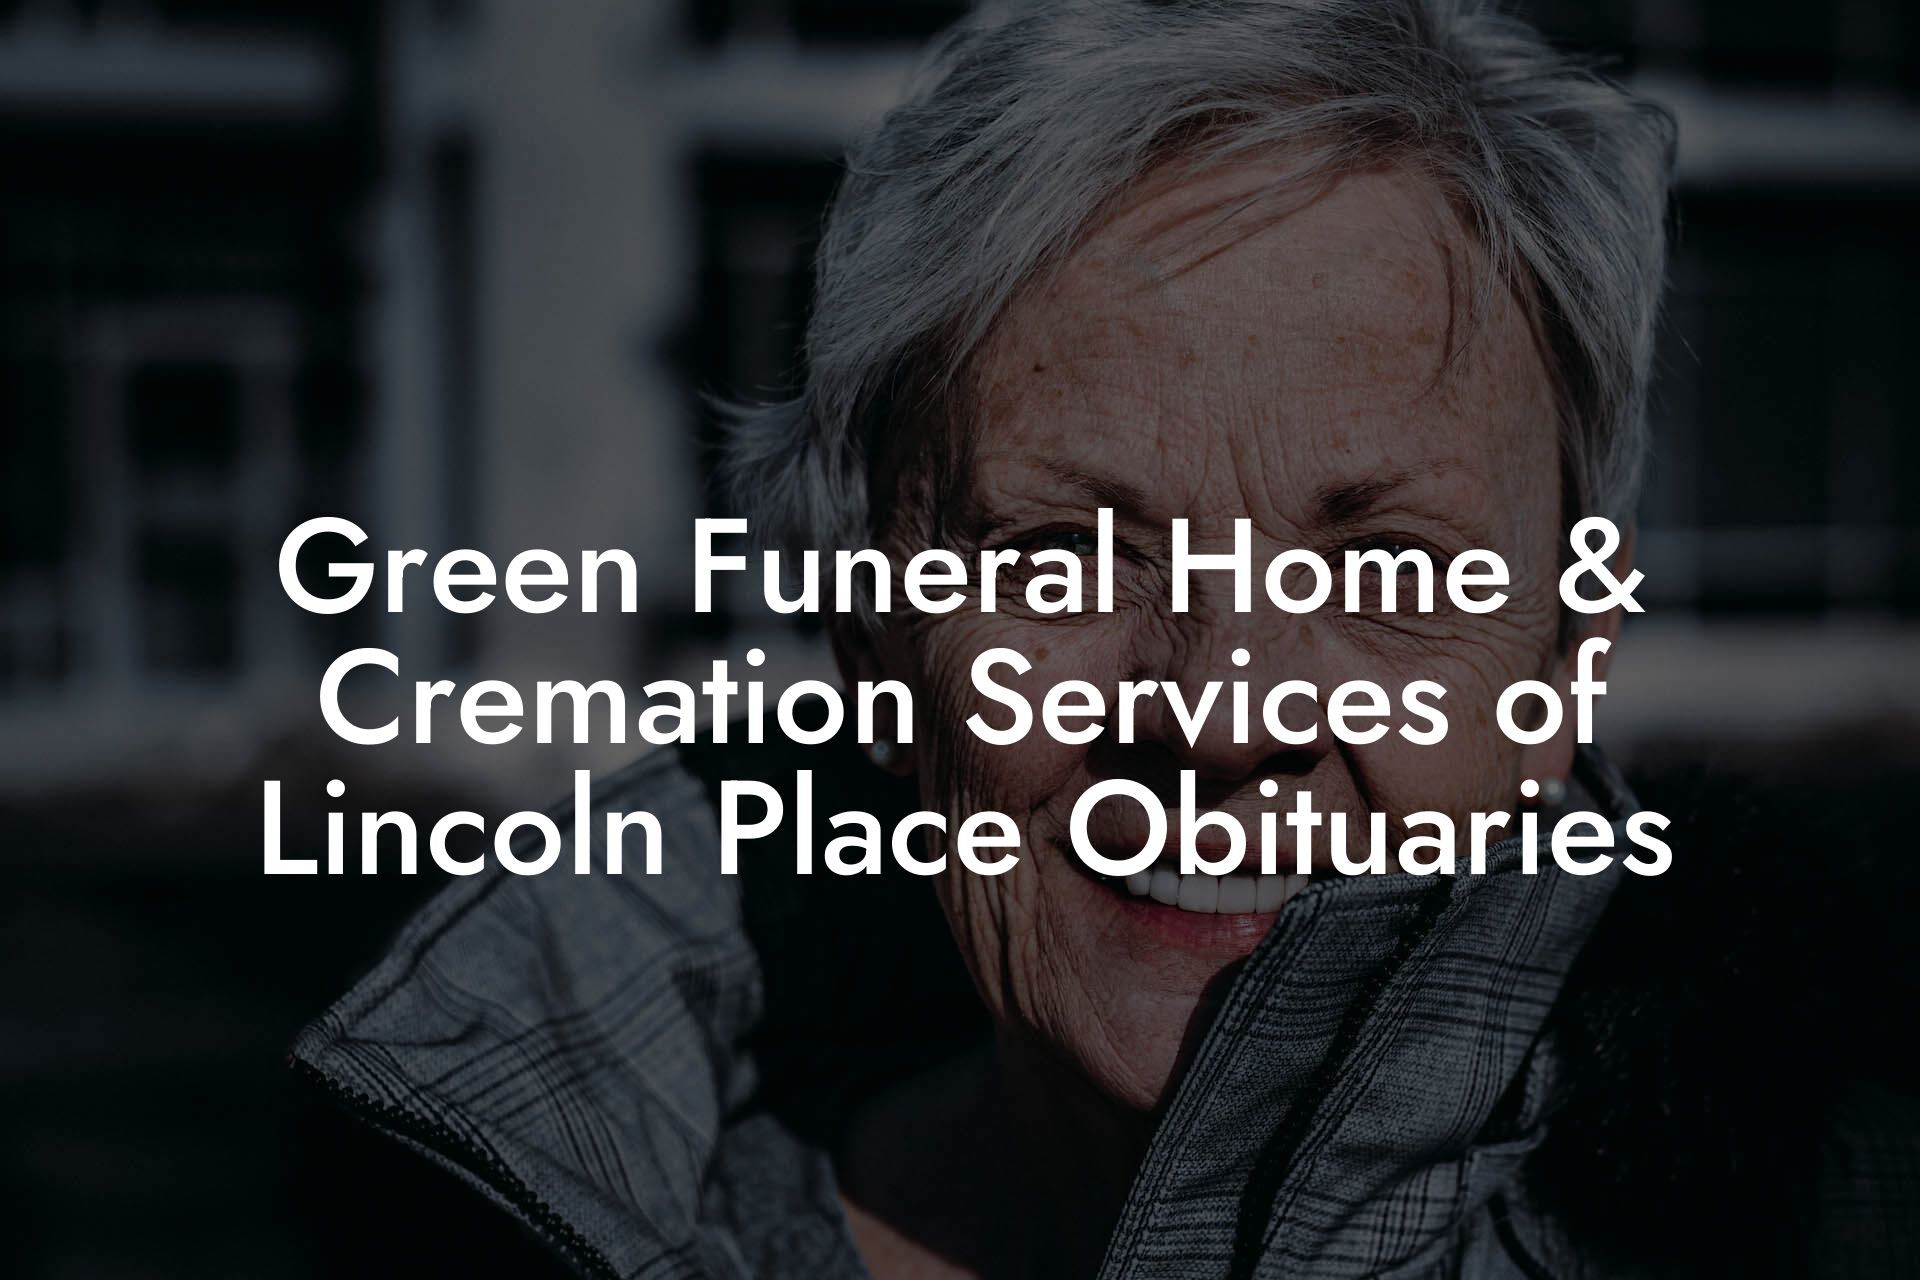 Green Funeral Home & Cremation Services of Lincoln Place Obituaries